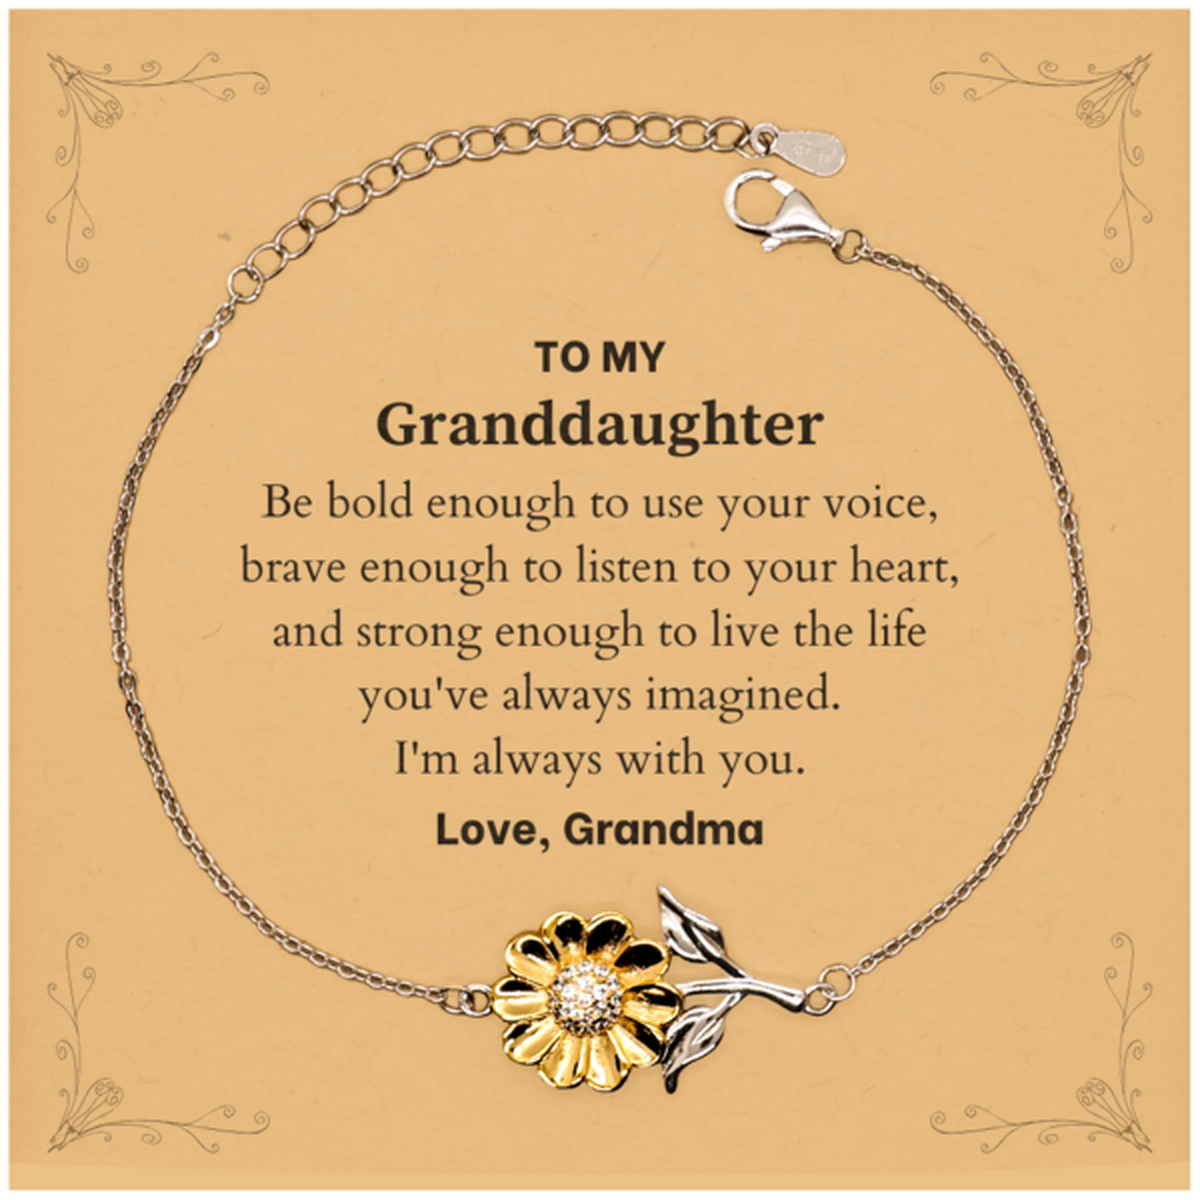 Keepsake Granddaughter Sunflower Bracelet Gift Idea Graduation Christmas Birthday Granddaughter from Grandma, Granddaughter Be bold enough to use your voice, brave enough to listen to your heart. Love, Grandma